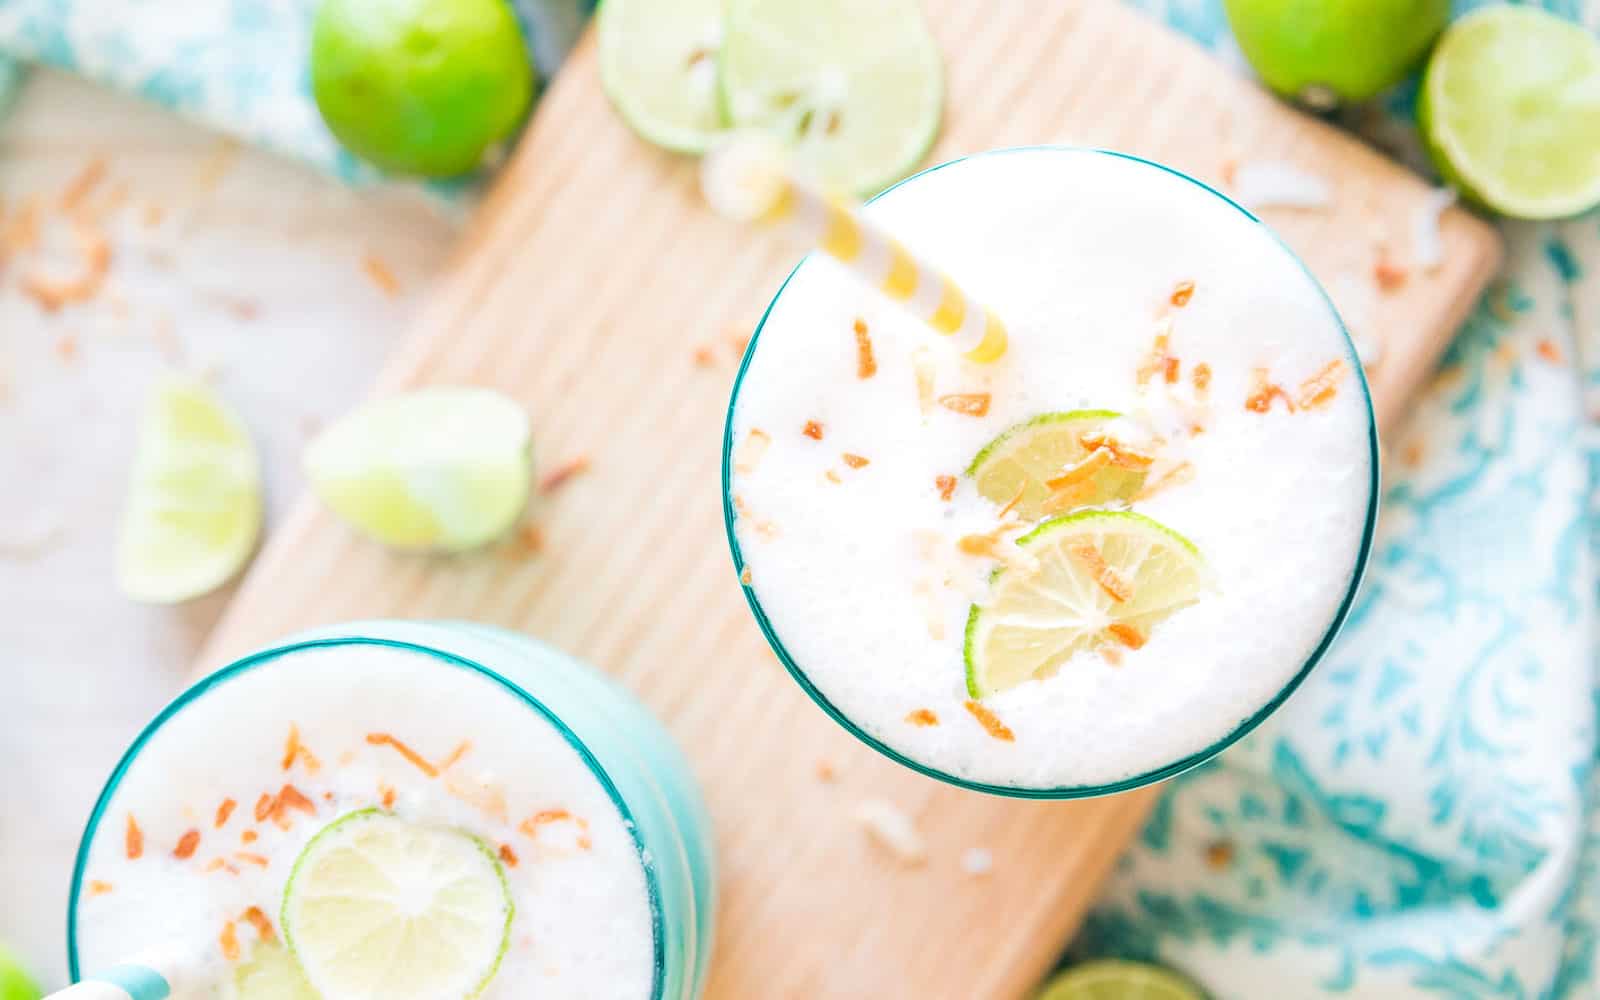 Key lime smoothie with lime and toasted coconut garnish.